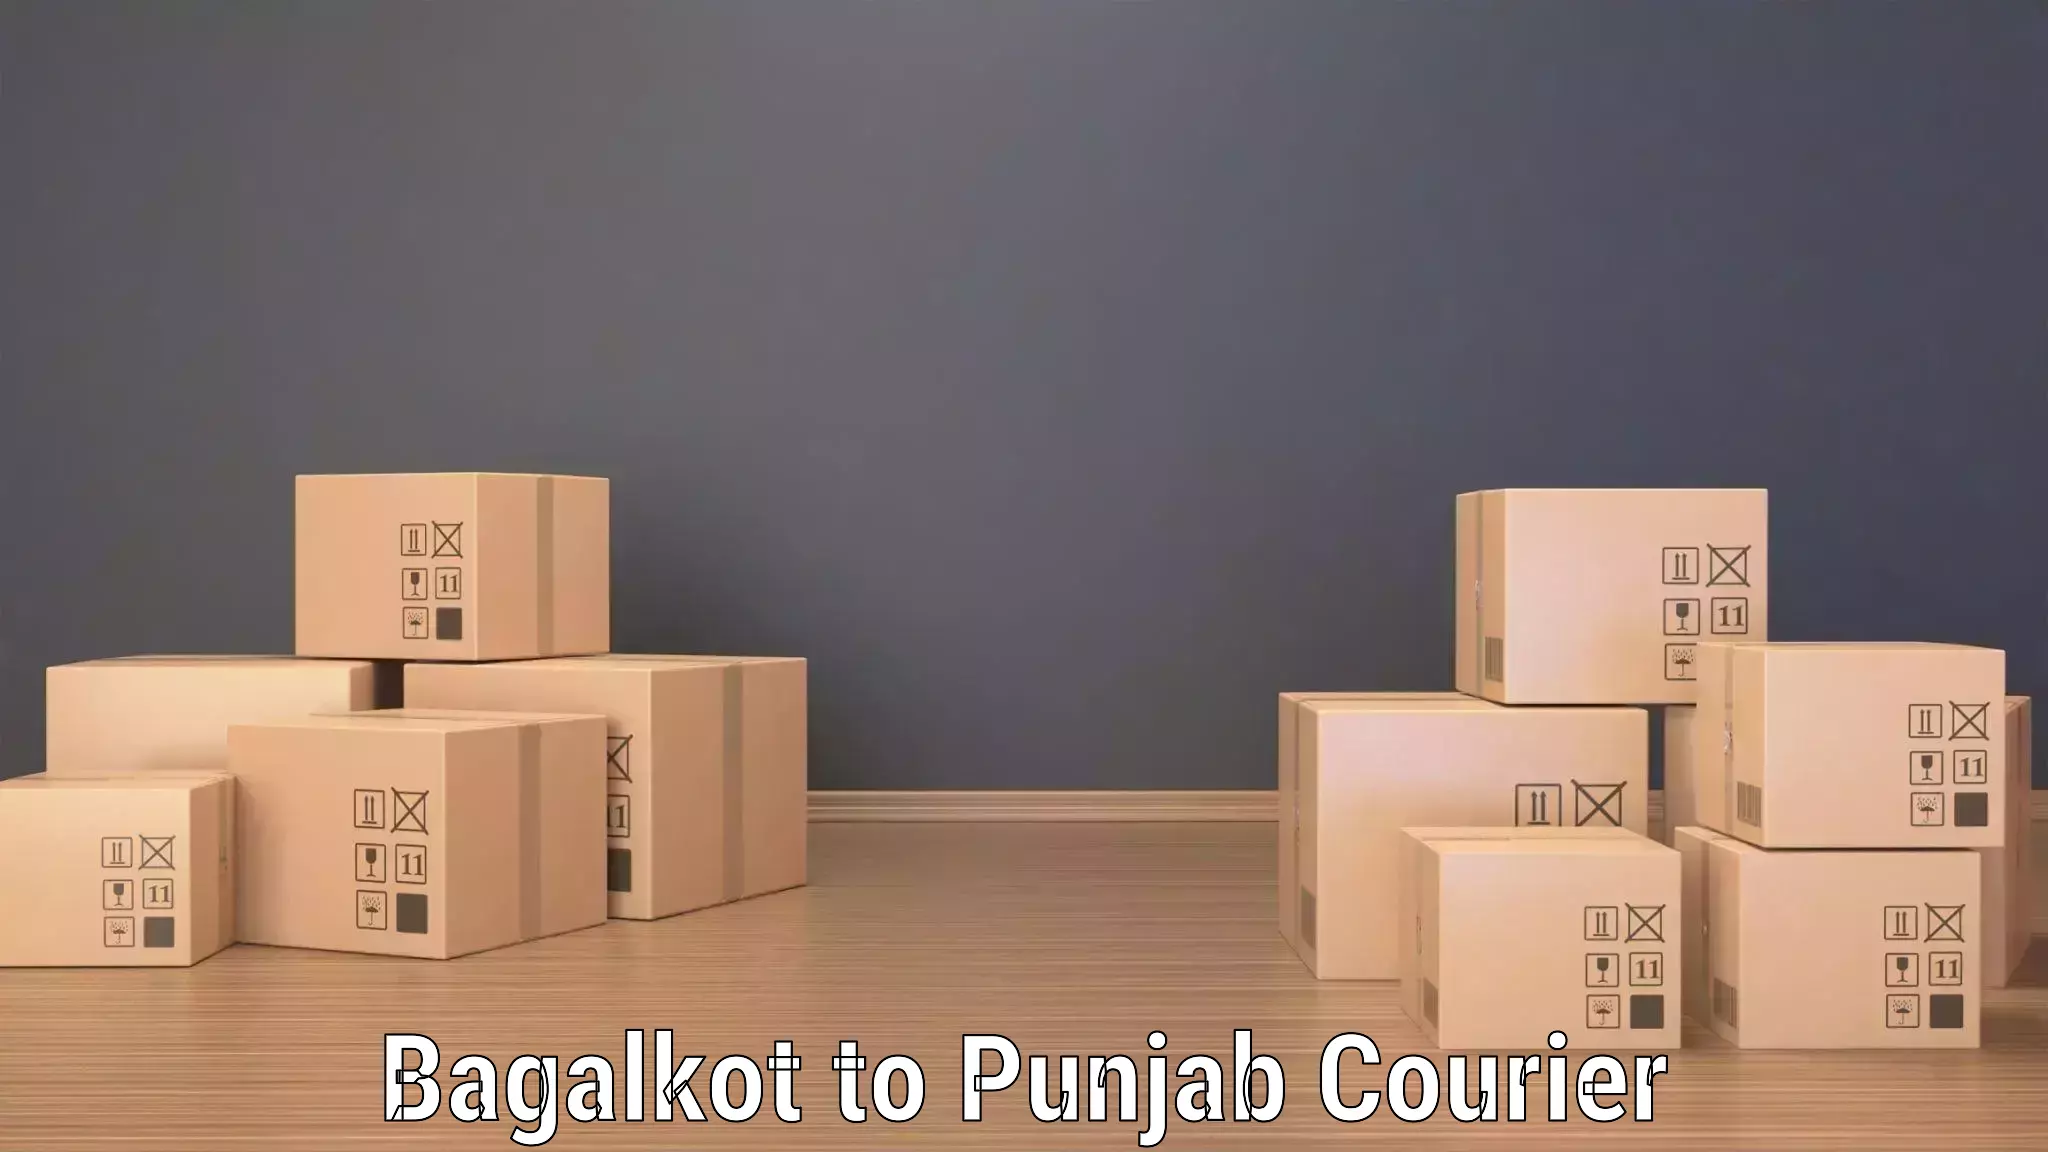 Advanced tracking systems Bagalkot to Mohali